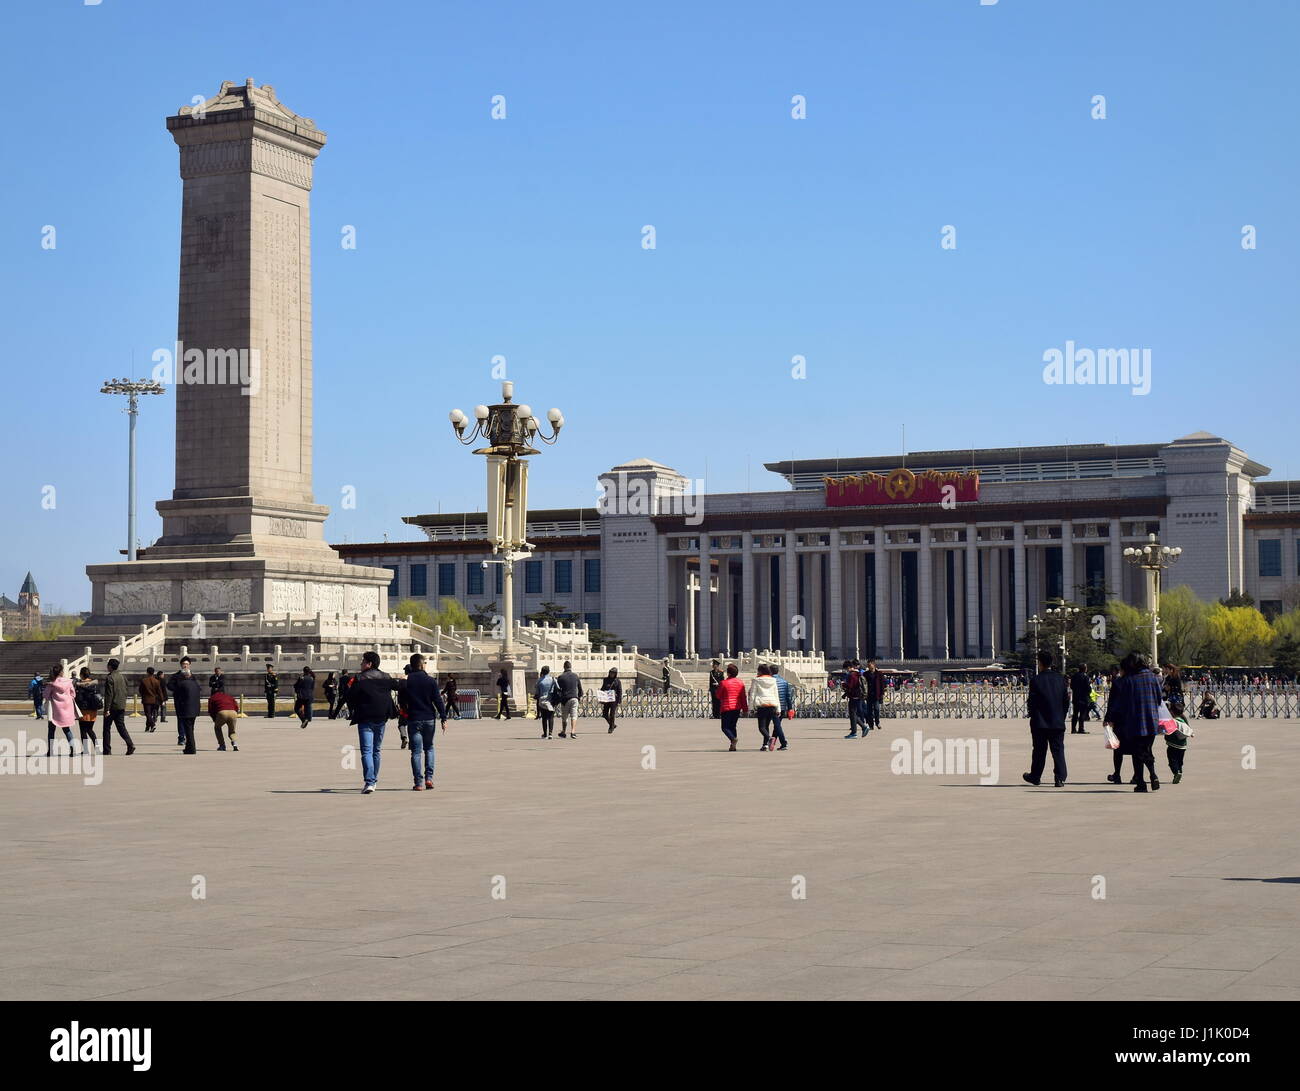 Beijing Tiananmen square landmarks: China National Museum behind the Monument to the People's Heroes, under a clear blue sky Stock Photo